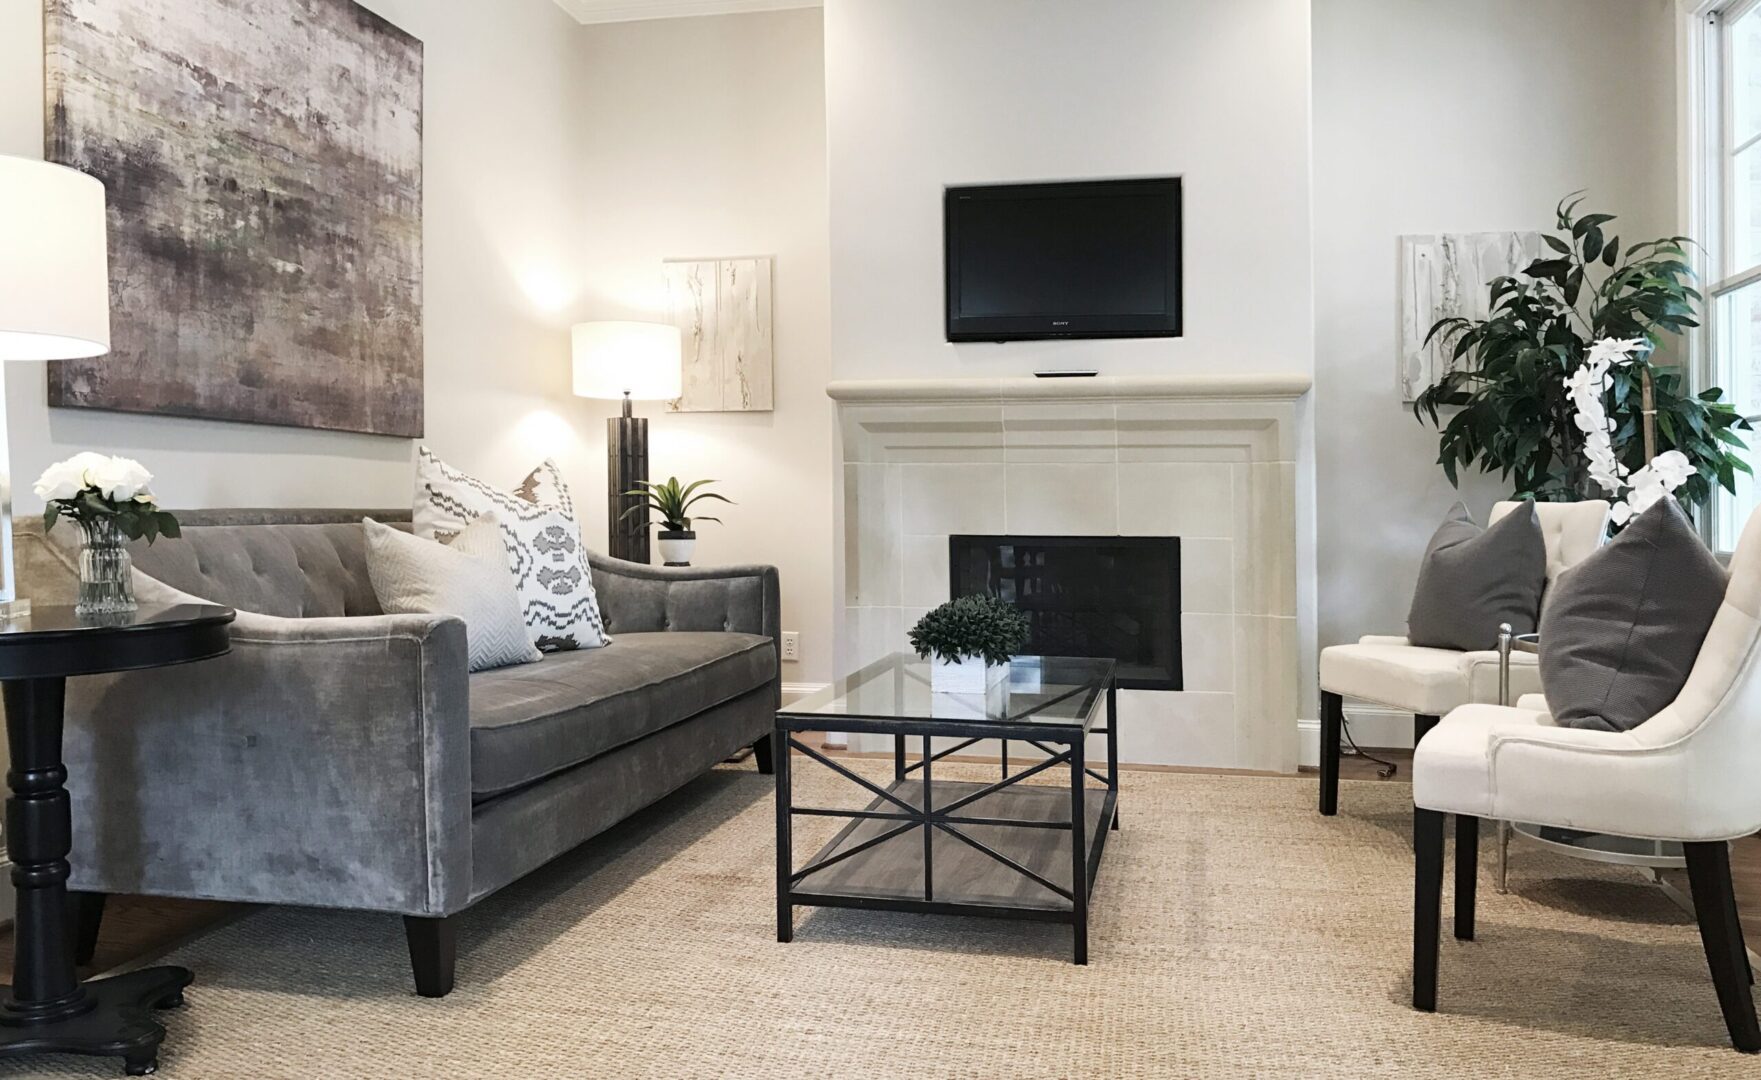 A living room with gray furniture and a fireplace.